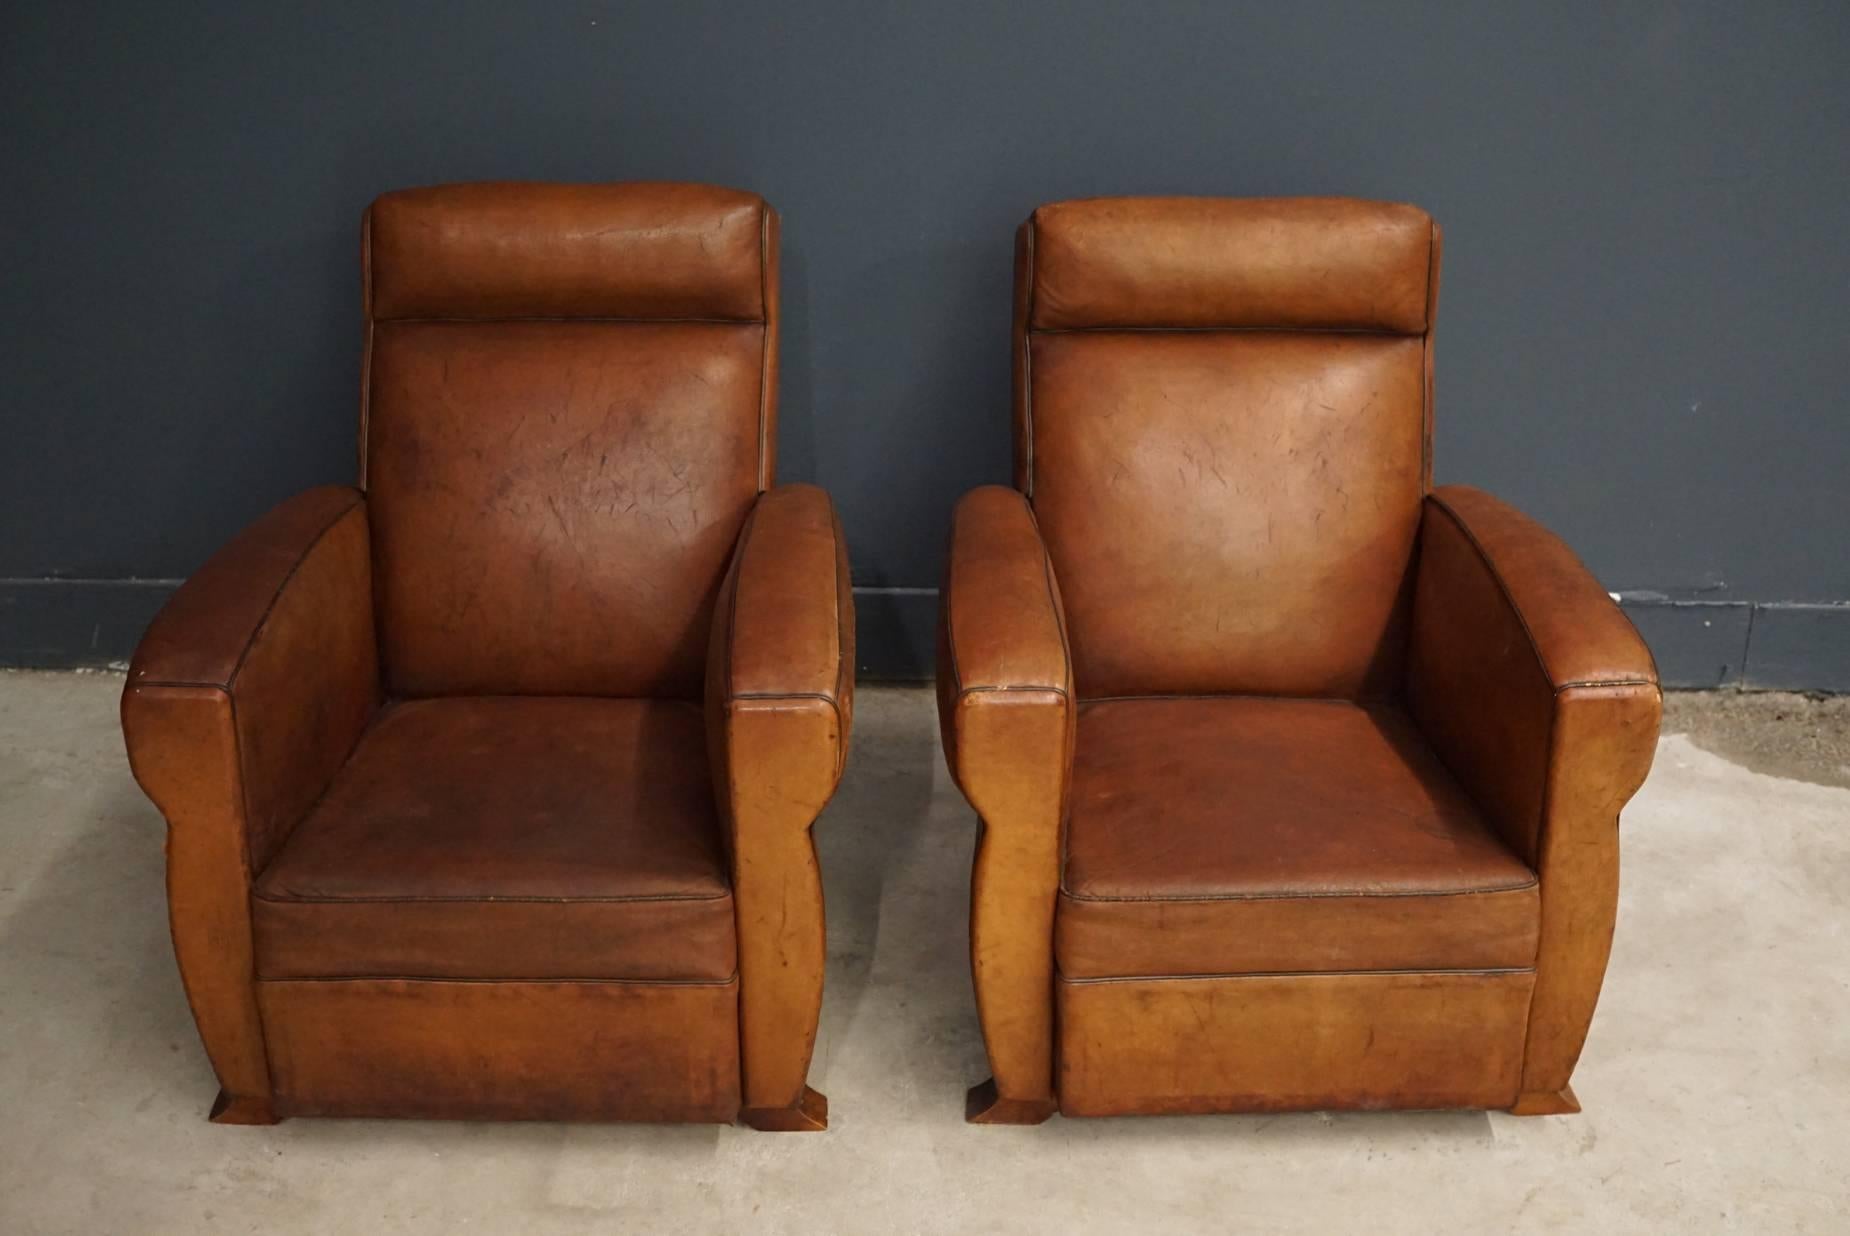 Pair of French Cognac Leather Club Chairs, 1940s (Industriell)